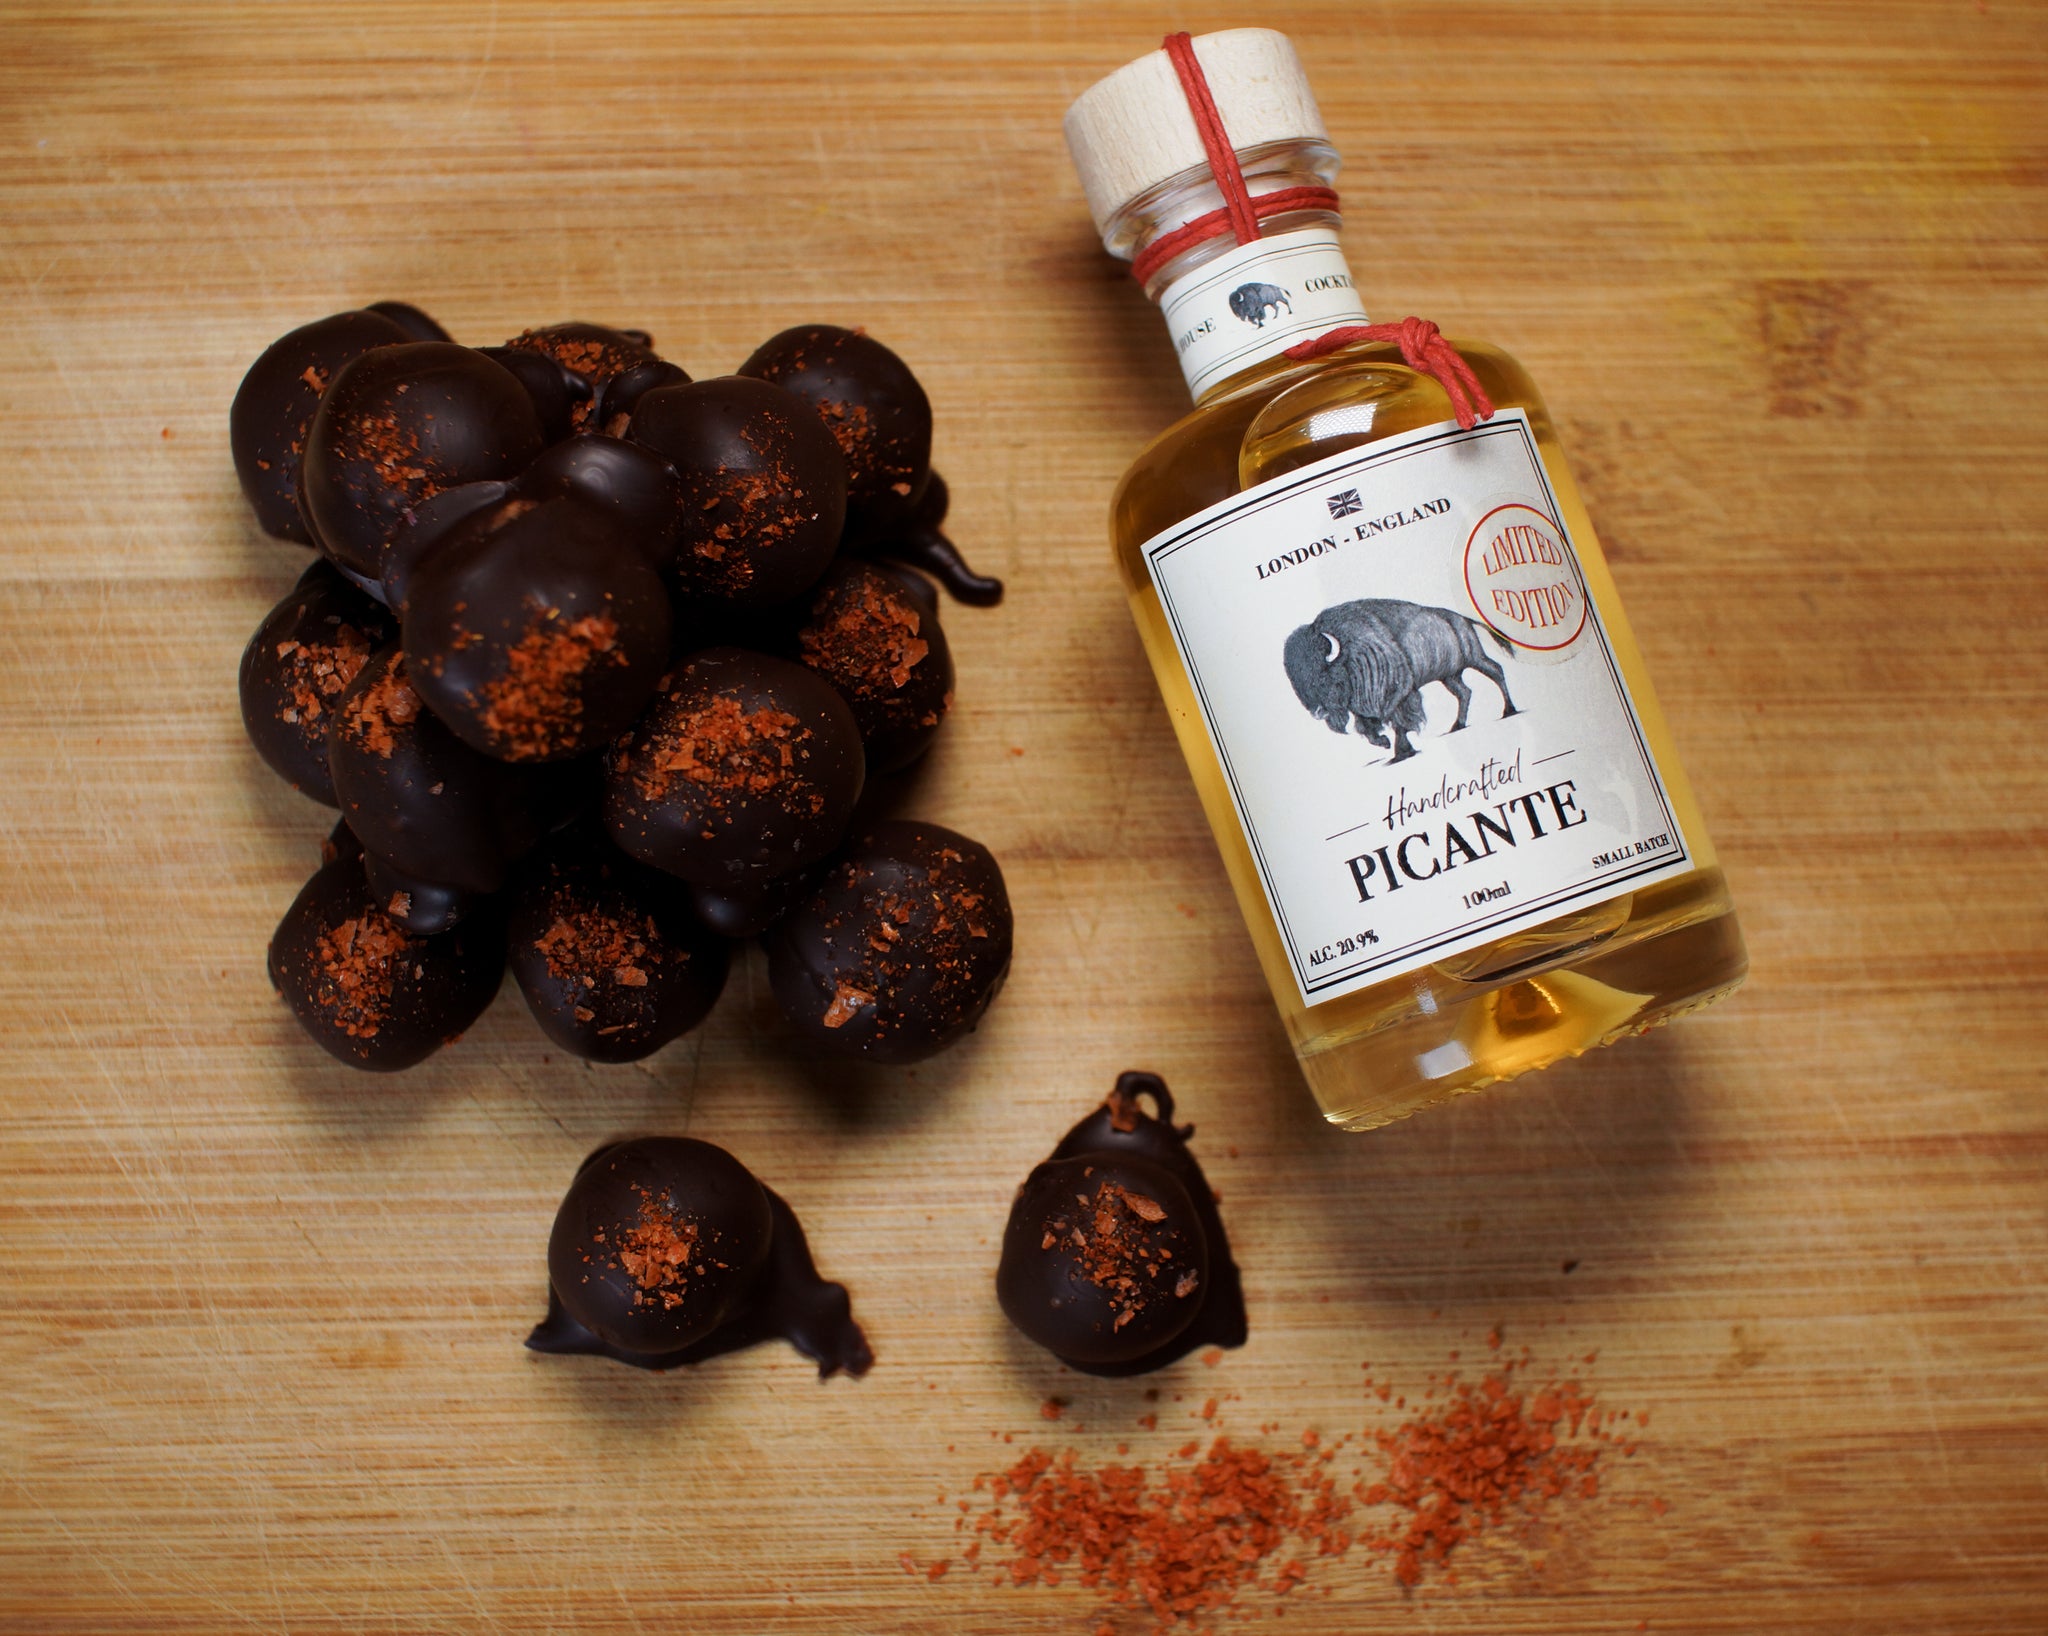 Picante-Spiked Chocolate Truffles